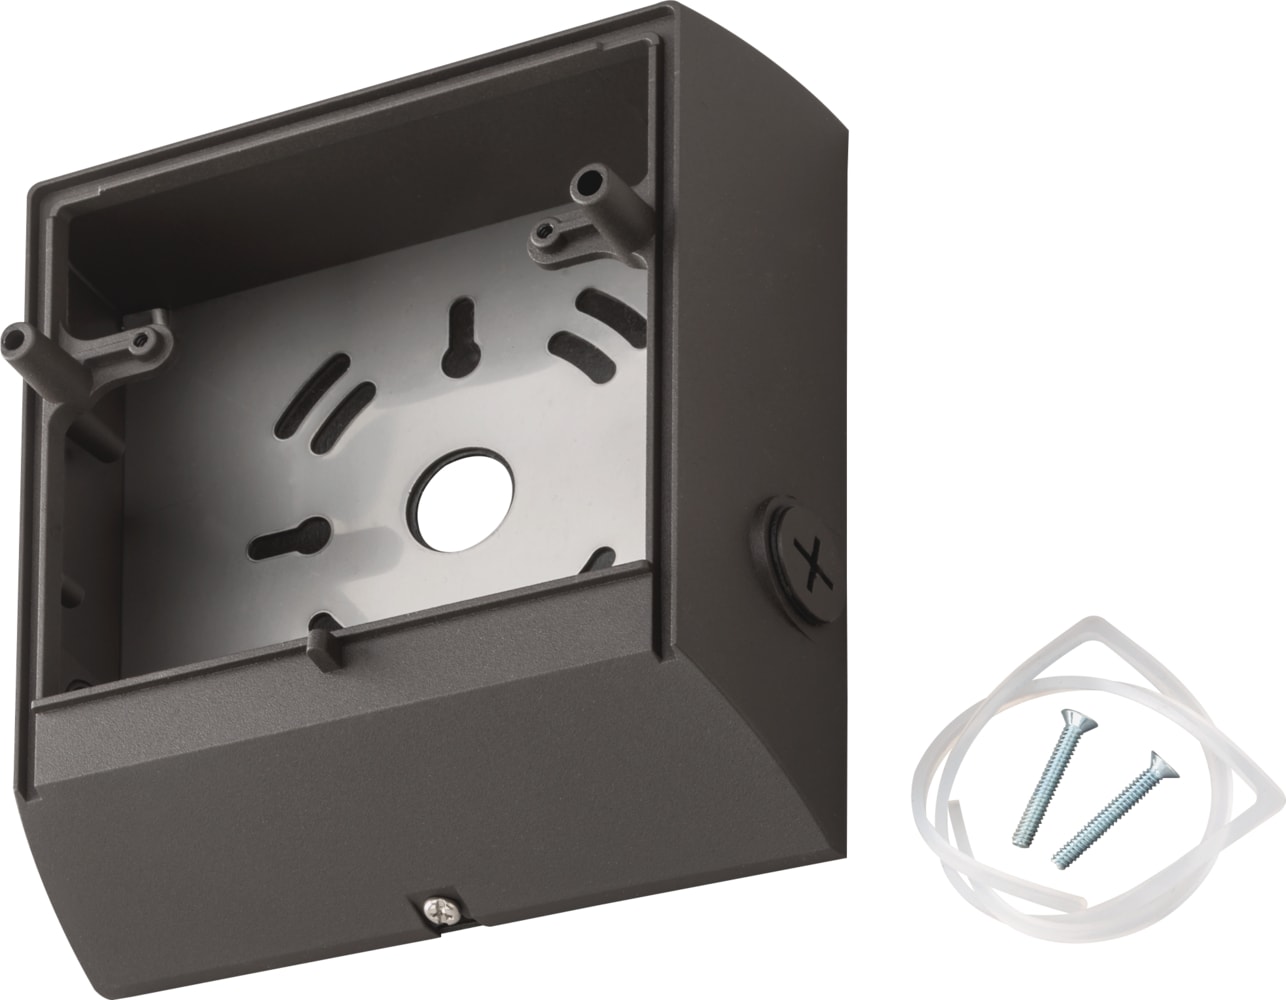 Details about   New Lithonia Lighting LIL LED BB DDBTXD Wall Pack Conduit Entry Wiring Box 